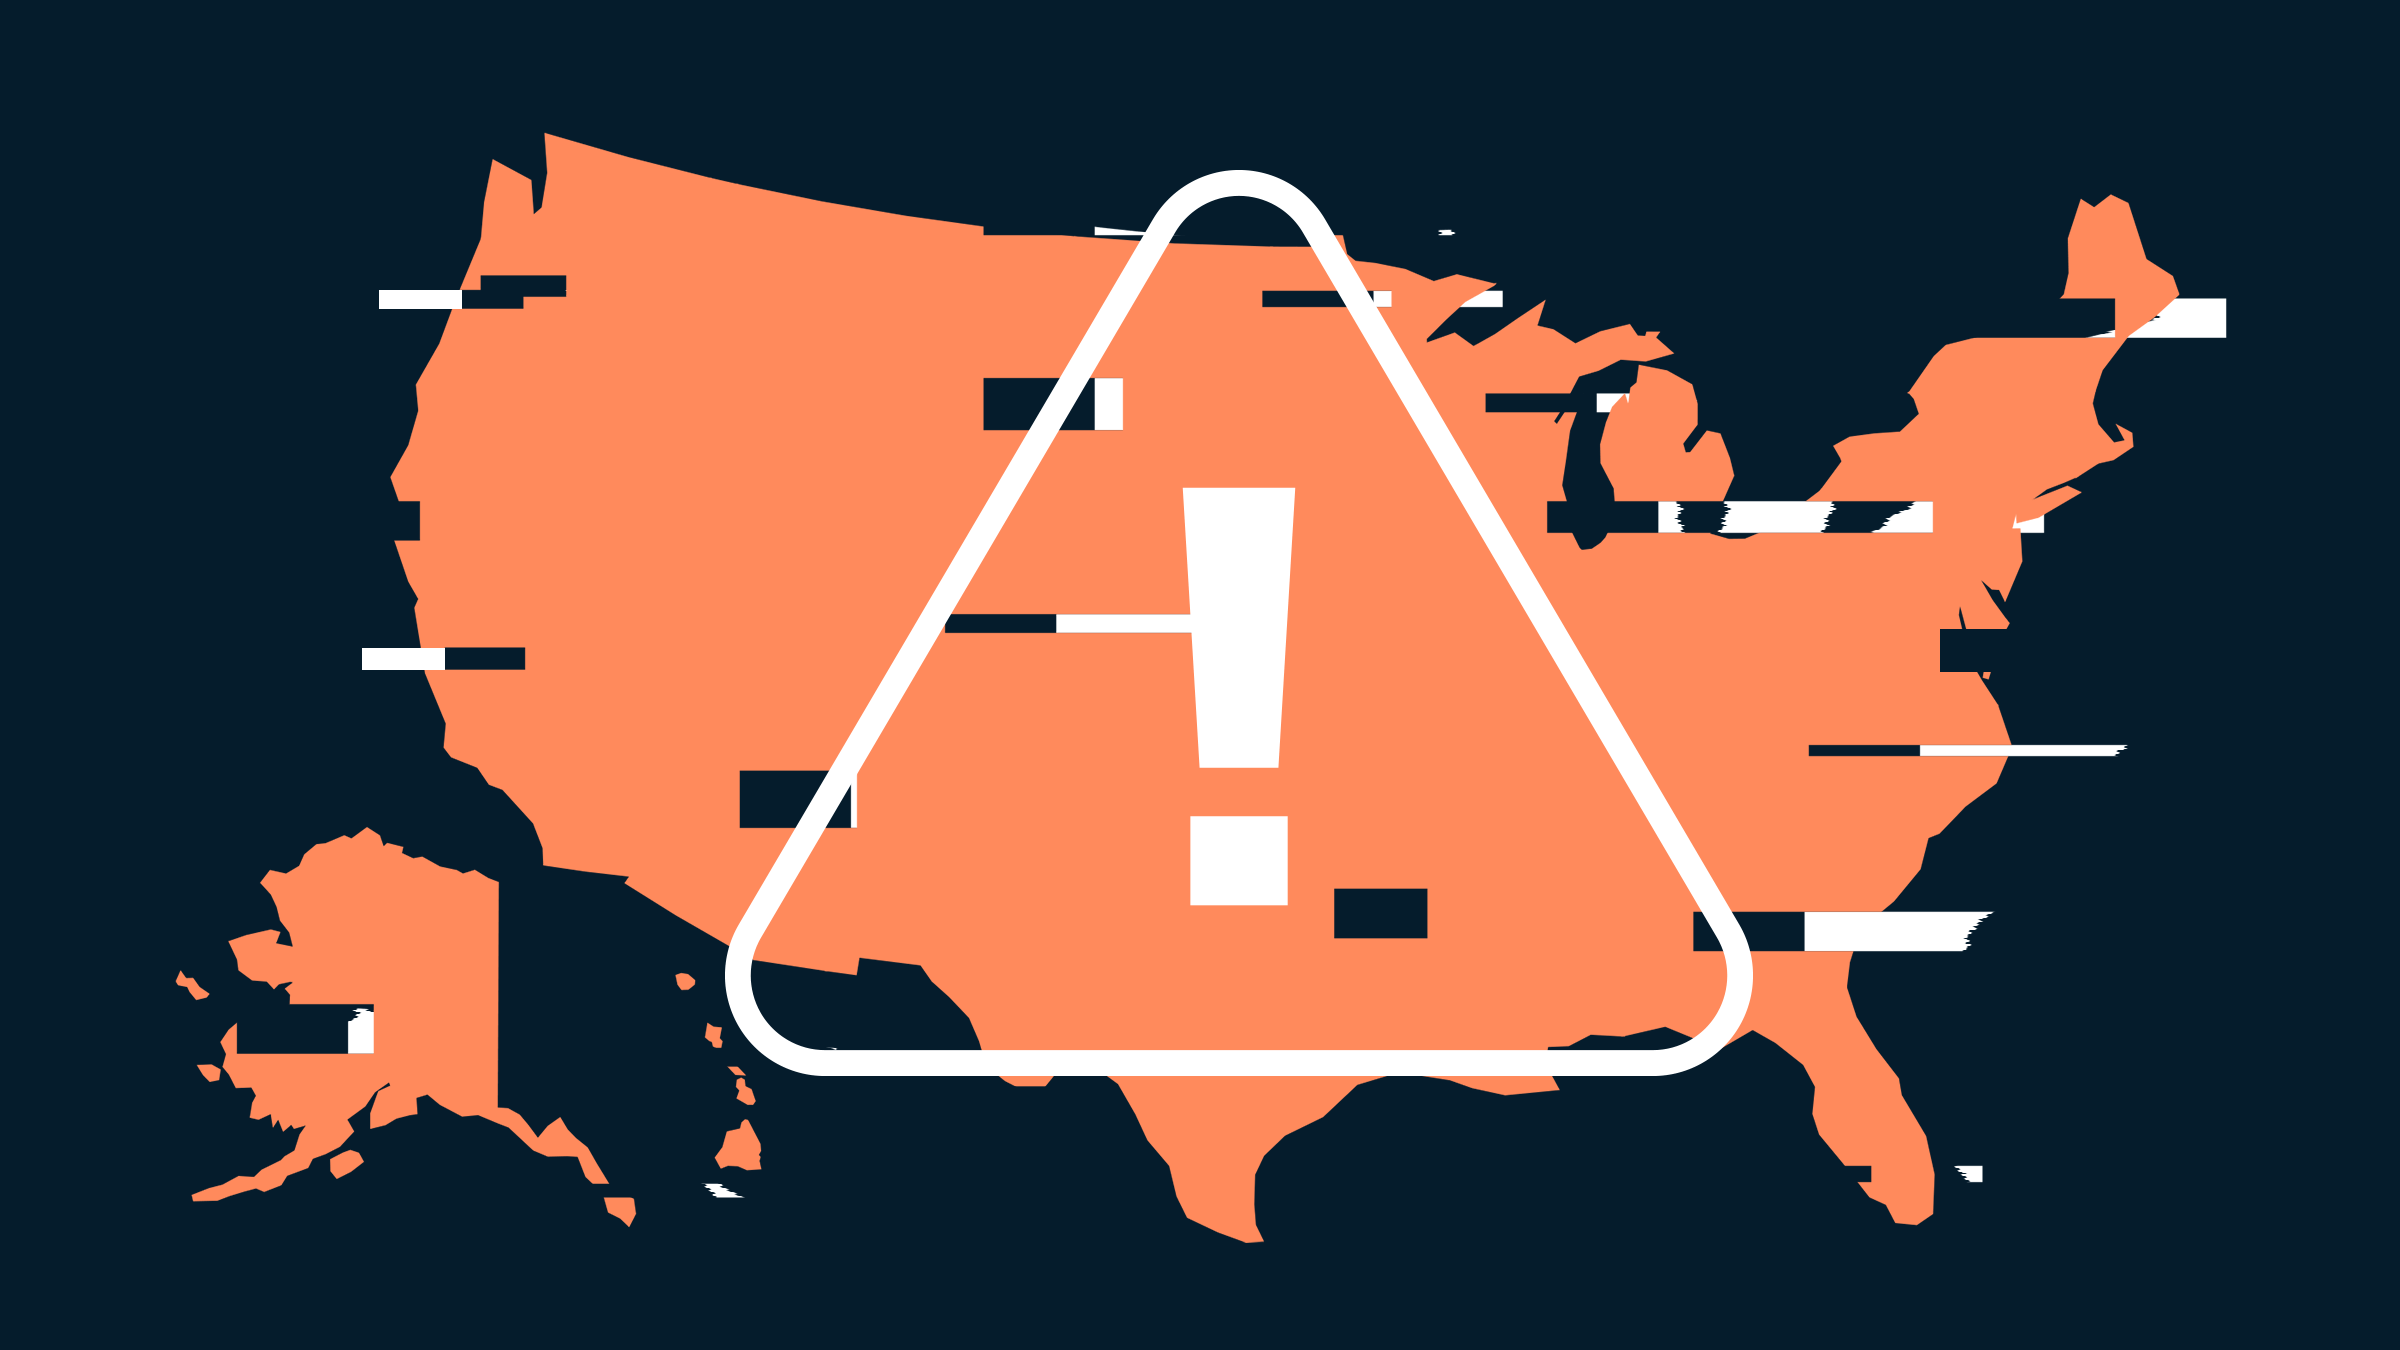 A glitched orange map of the US. Overlaid on top is a white triangle with an exclamation point in the center.